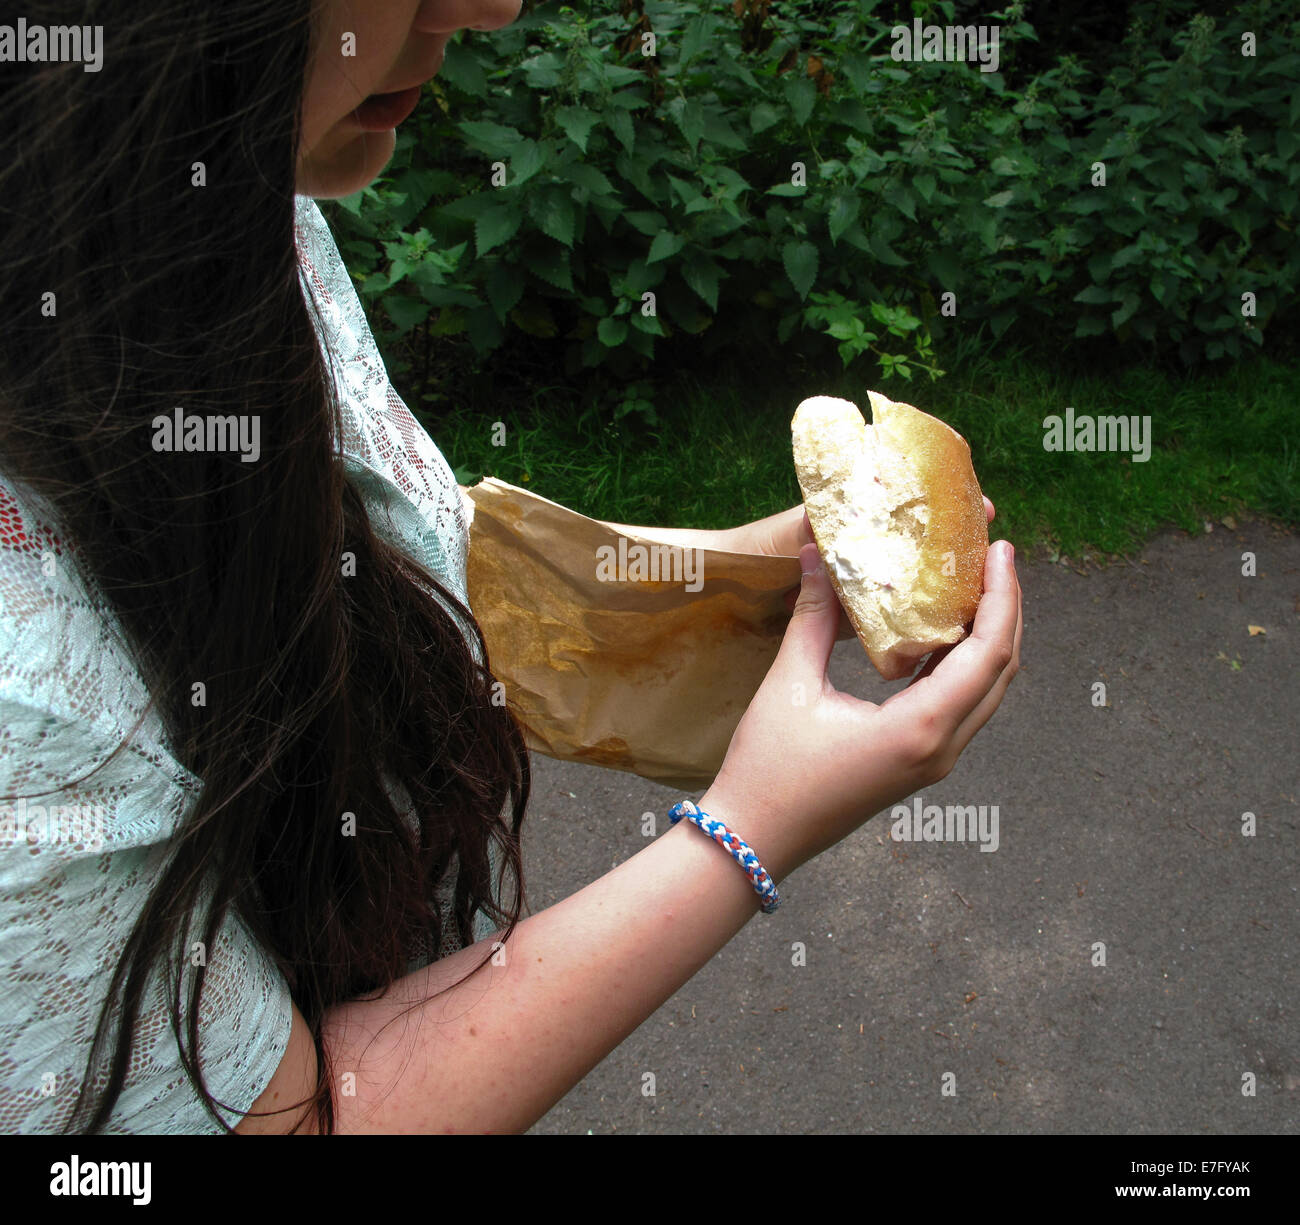 Young girl eating filled roll outside Stock Photo